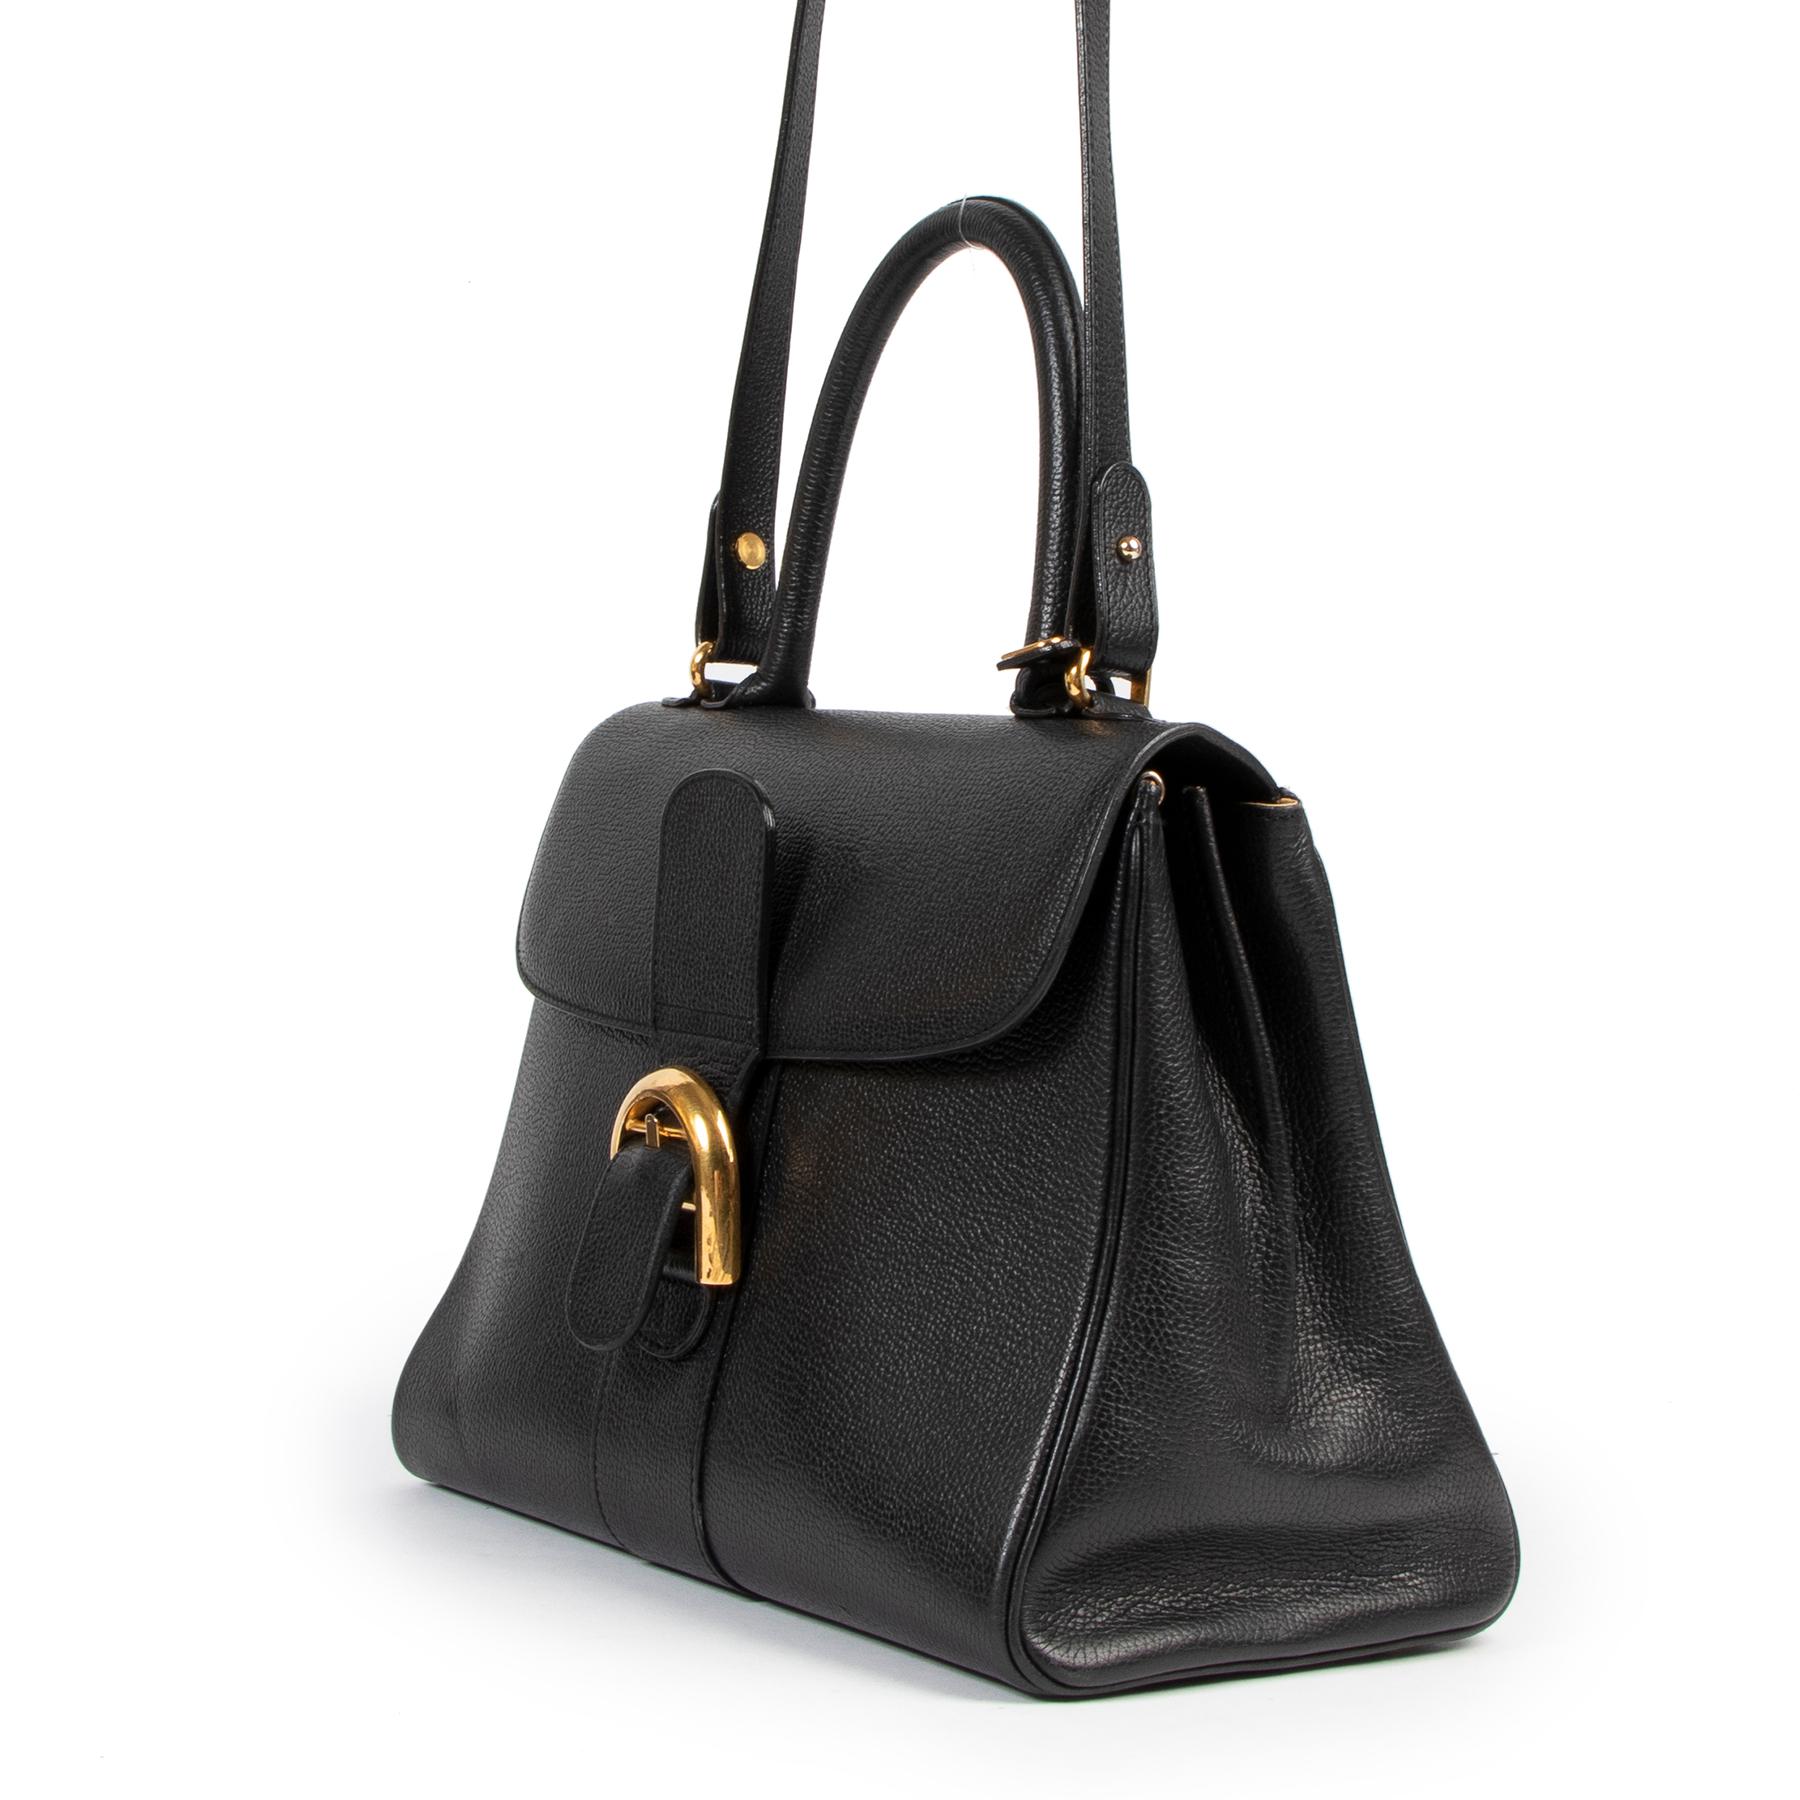 Delvaux Brillant Black MM + Strap In Good Condition For Sale In Antwerp, BE